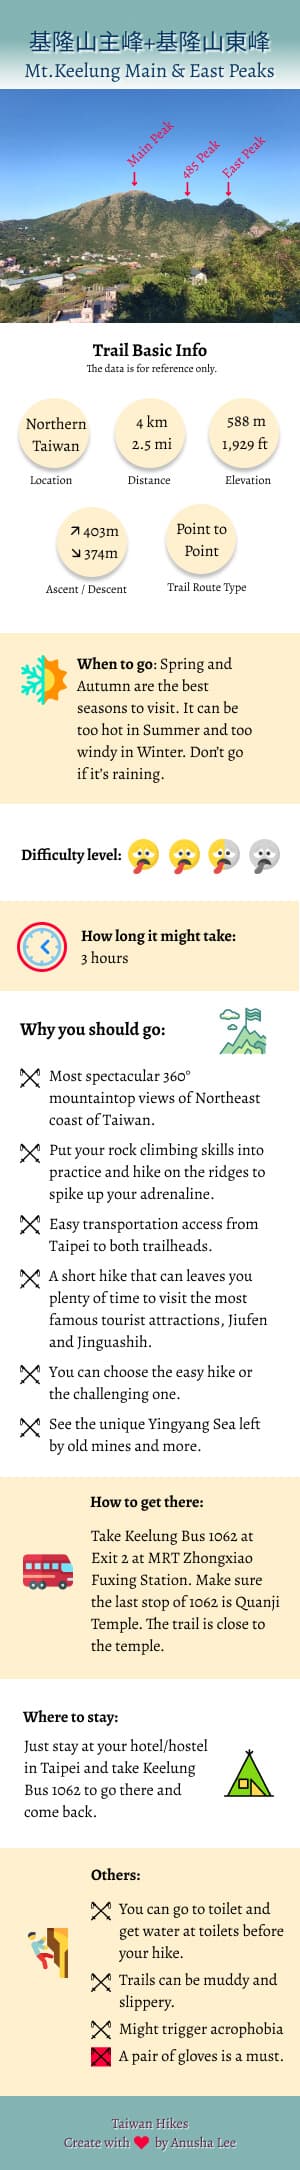 Mt. Keelung infographic